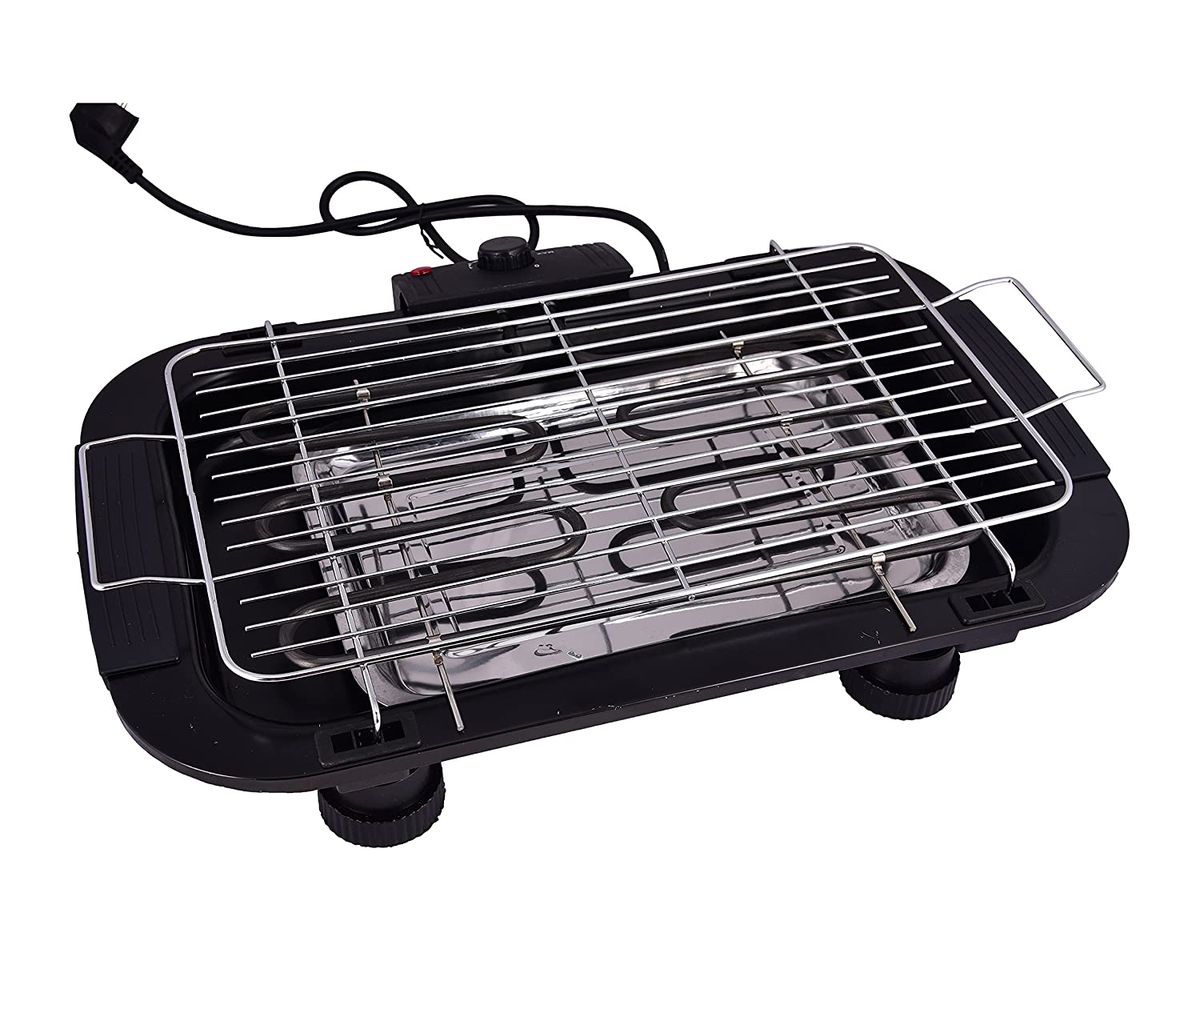 2000W Electric Barbeque Grill for Outdoor/Indoor Cooking